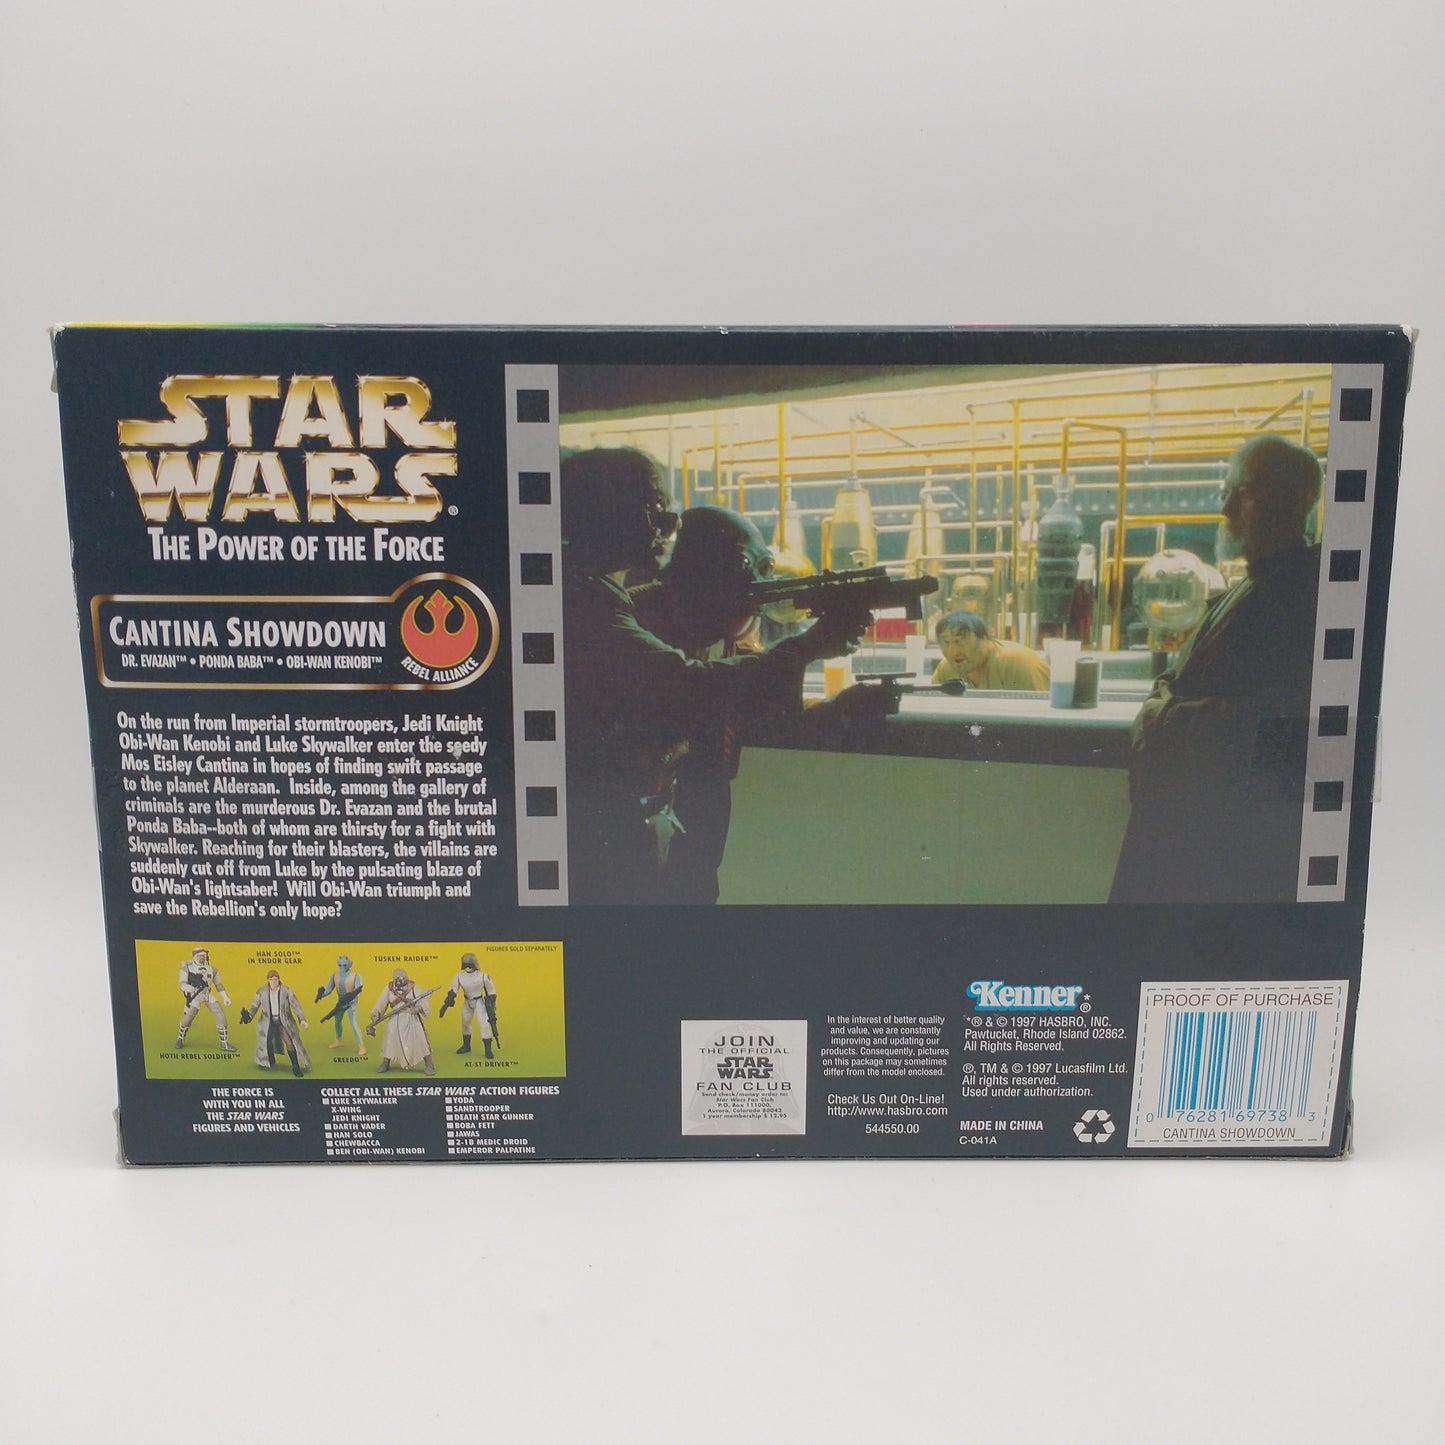 The back of the box